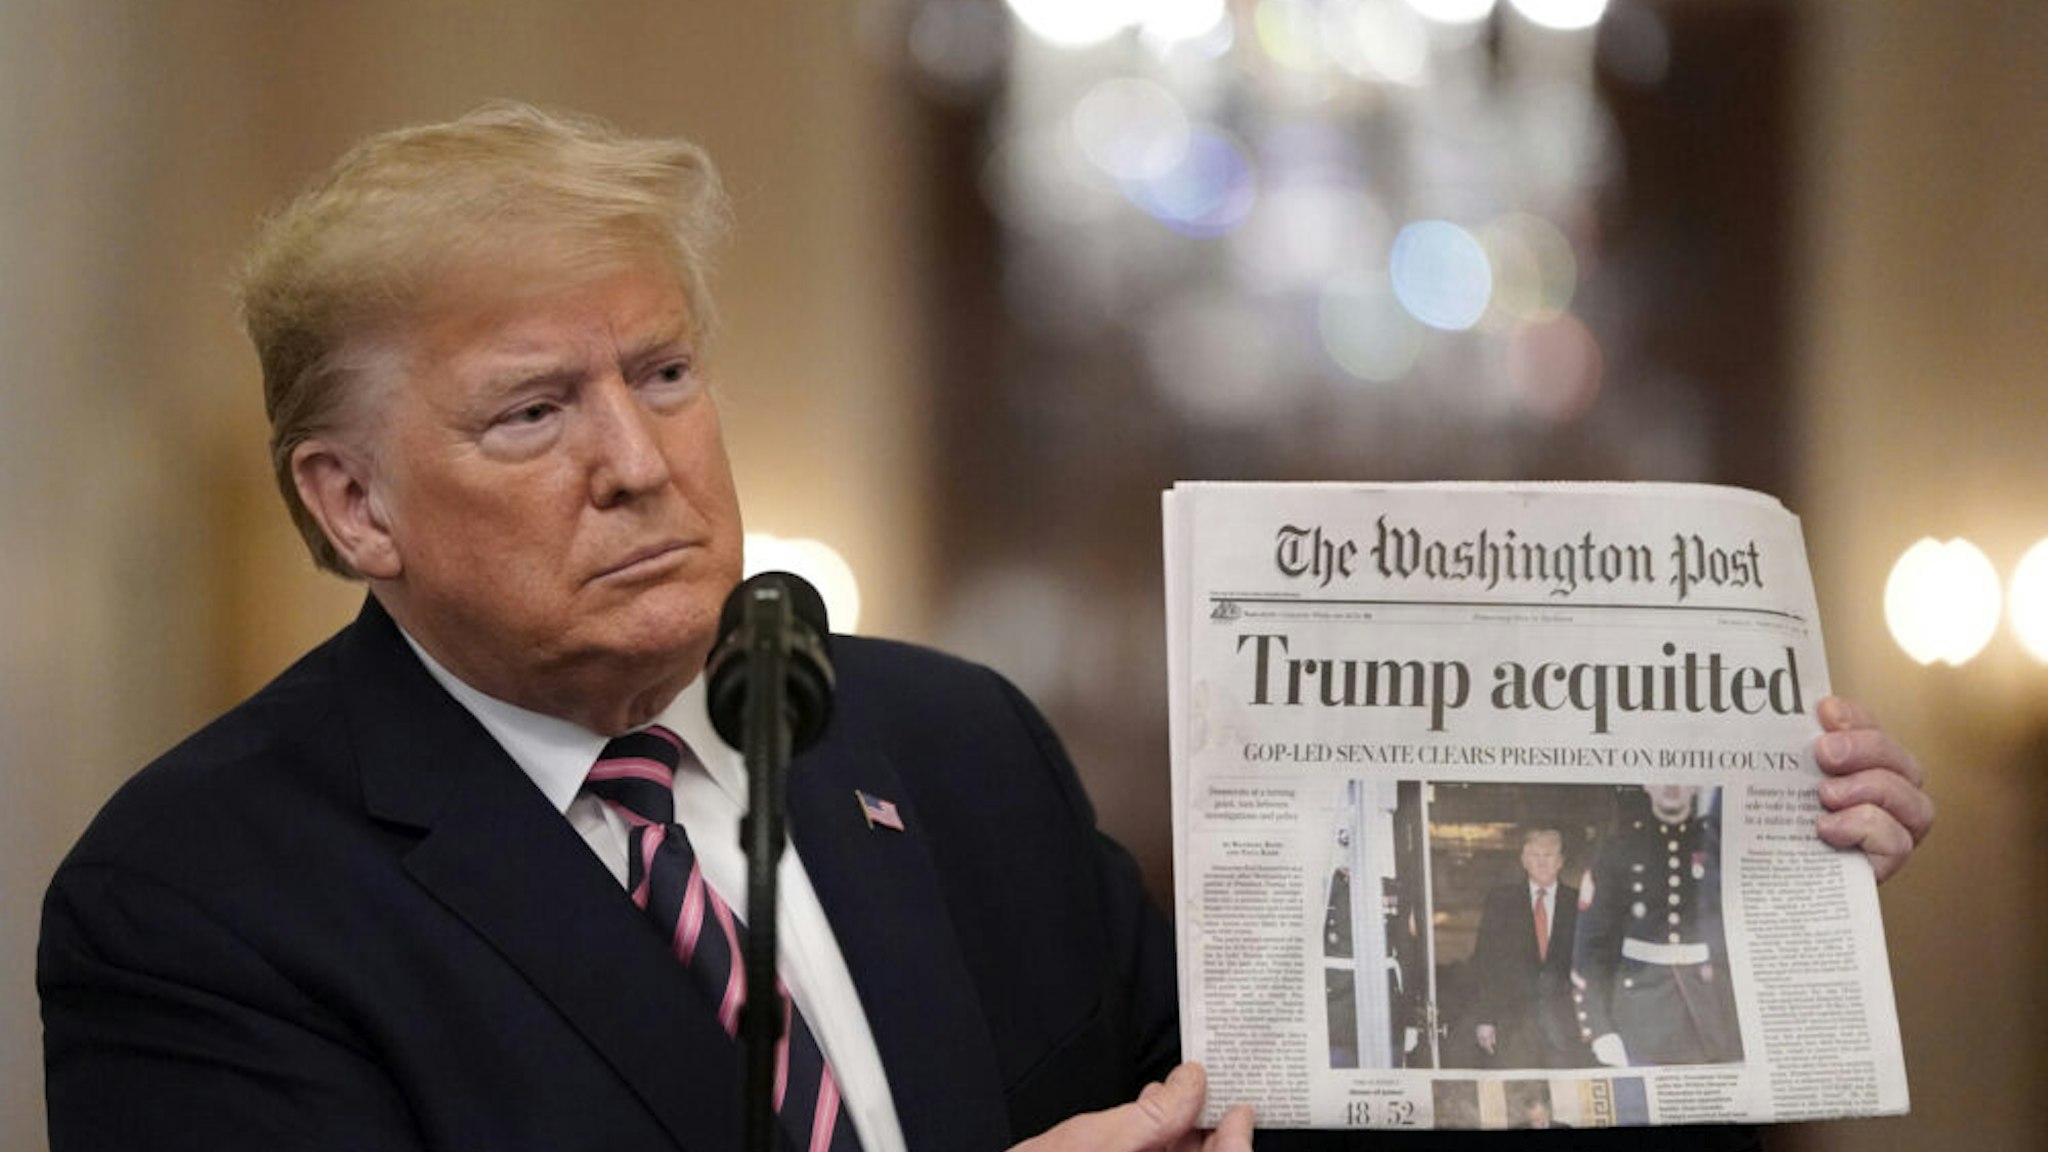 WASHINGTON, DC - FEBRUARY 06: U.S. President Donald Trump holds a copy of The Washington Post as he speaks in the East Room of the White House one day after the U.S. Senate acquitted on two articles of impeachment, ion February 6, 2020 in Washington, DC. After five months of congressional hearings and investigations about President Trump’s dealings with Ukraine, the U.S. Senate formally acquitted the president on Wednesday of charges that he abused his power and obstructed Congress.